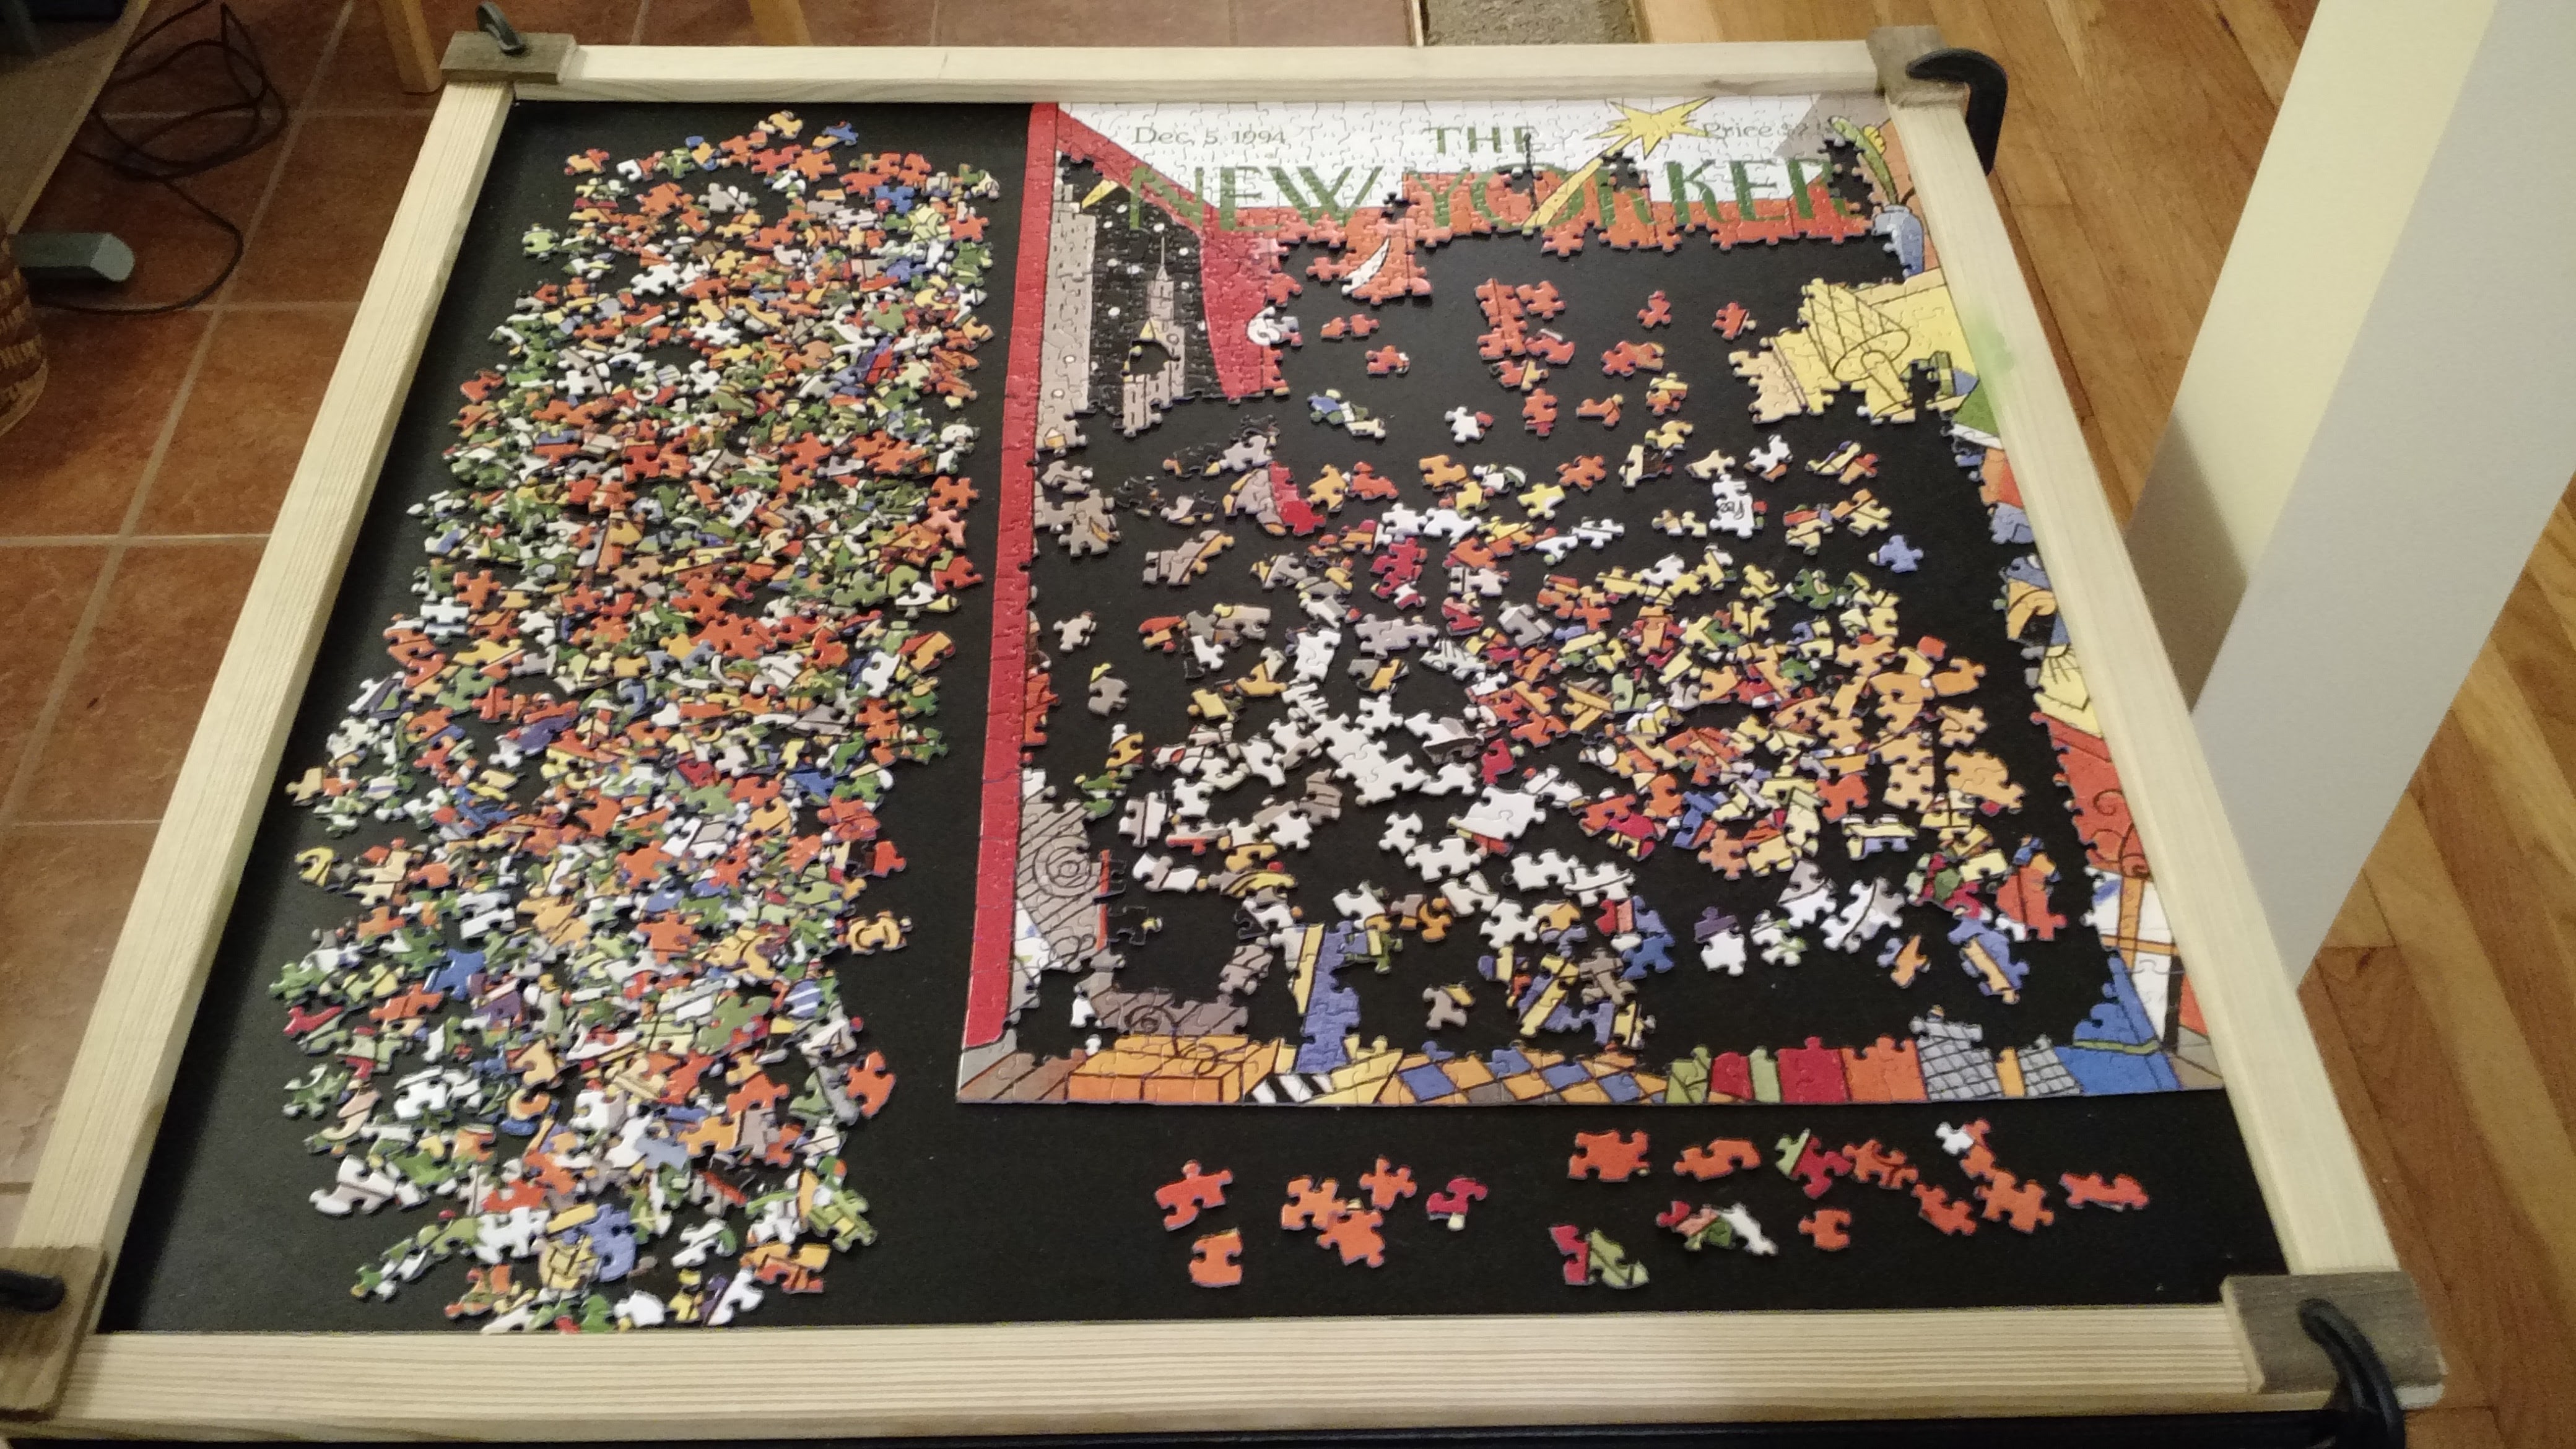 Using the edges to support the puzzle